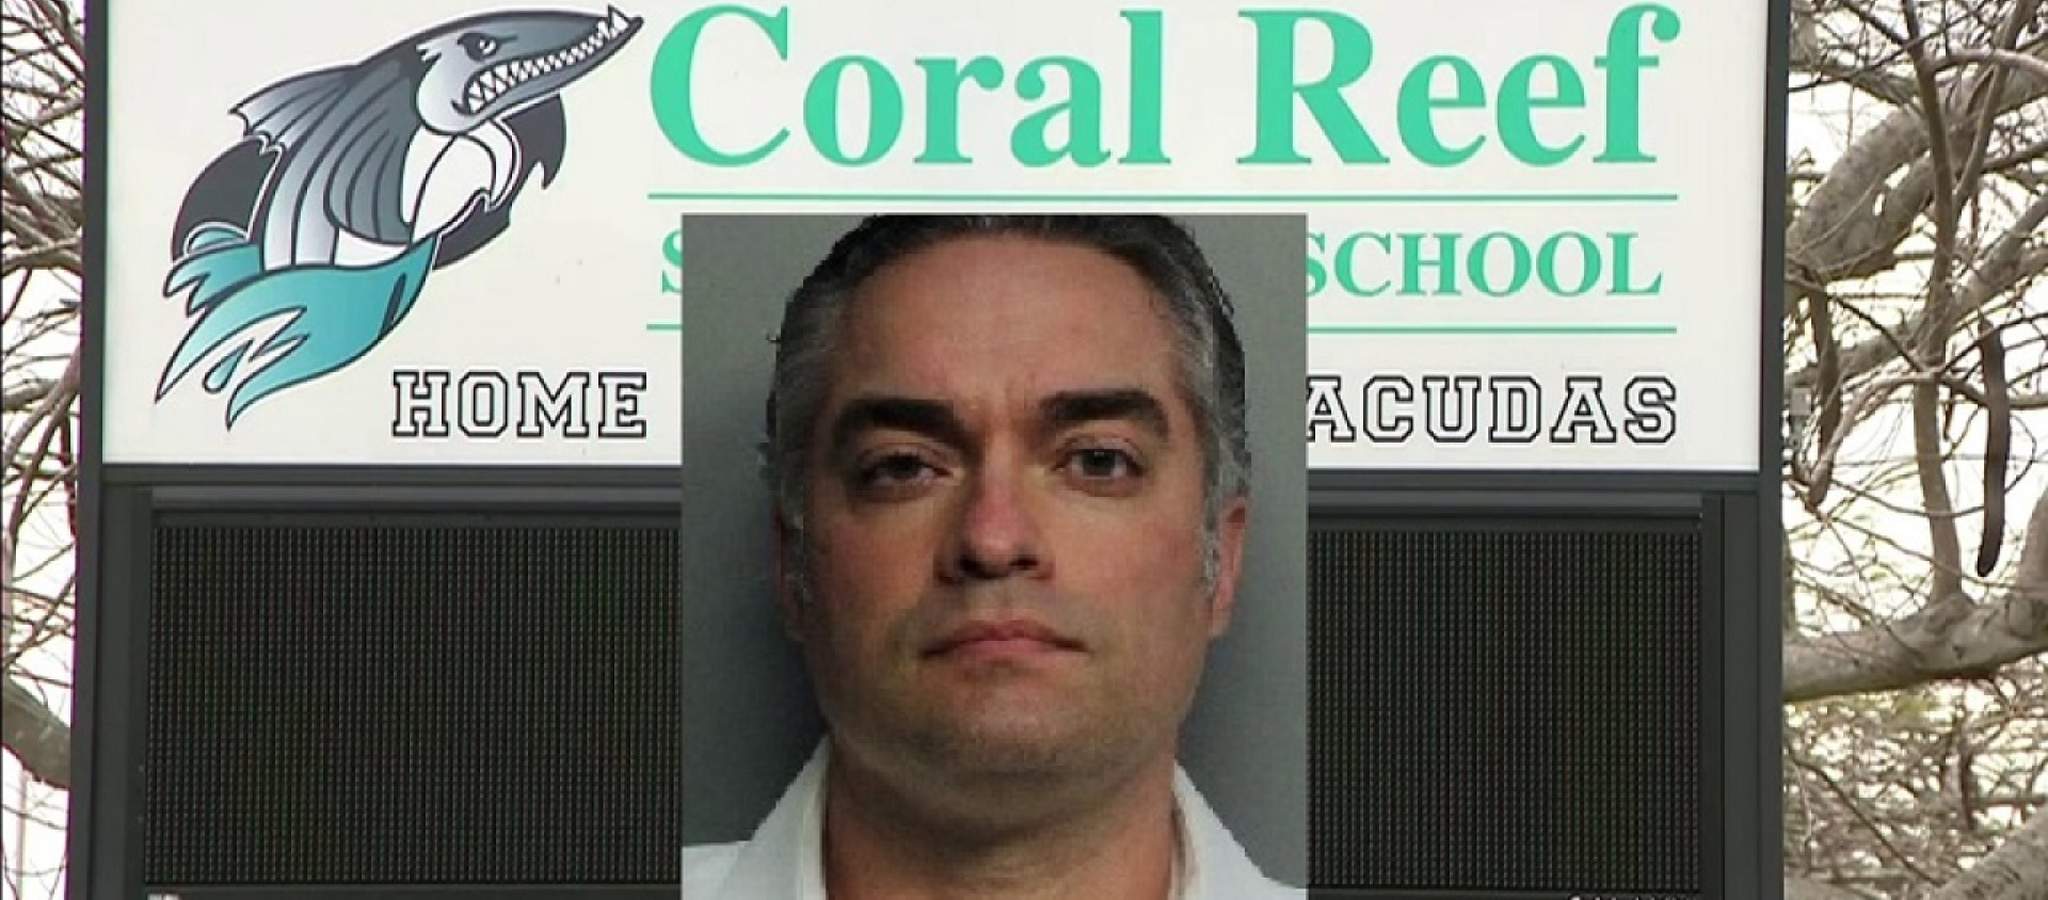 Southwest Miami-Dade teacher arrested by school police for inappropriate behavior